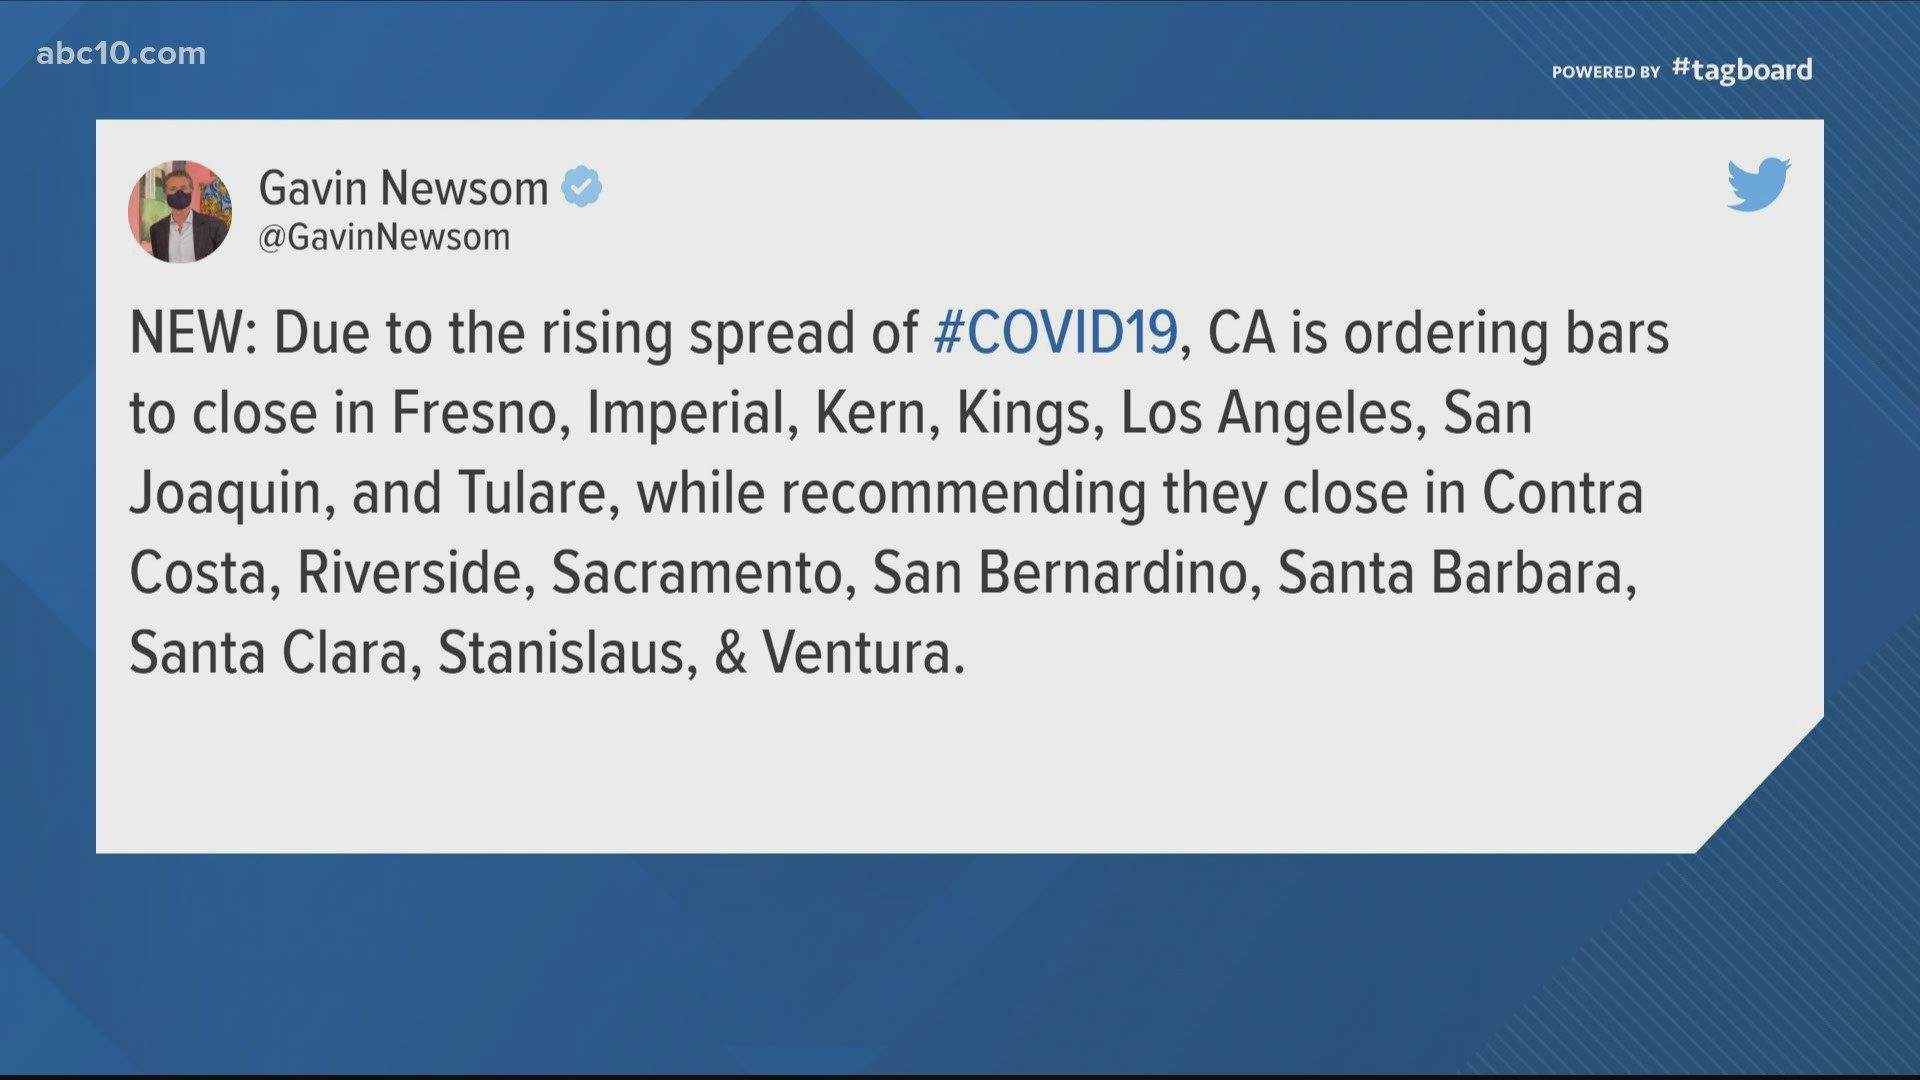 A surge in coronavirus cases in California counties caused action from the state. Governor Newsom called for bars to close in some counties like San Joaquin County.